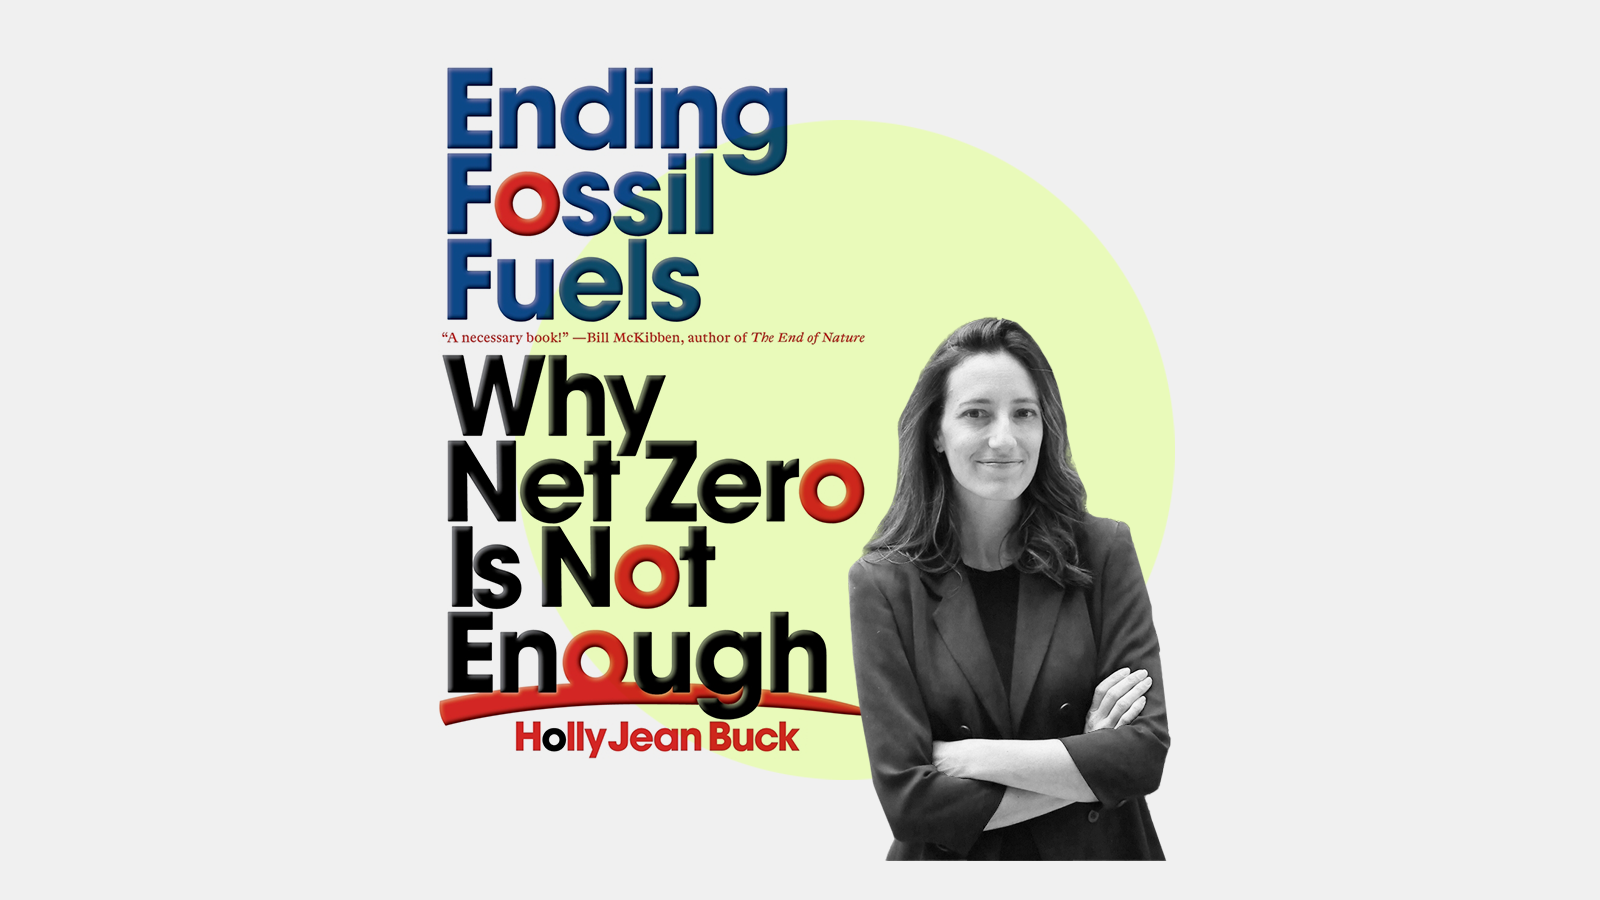 Holly Jean Buck and her book, Ending Fossil Fuels